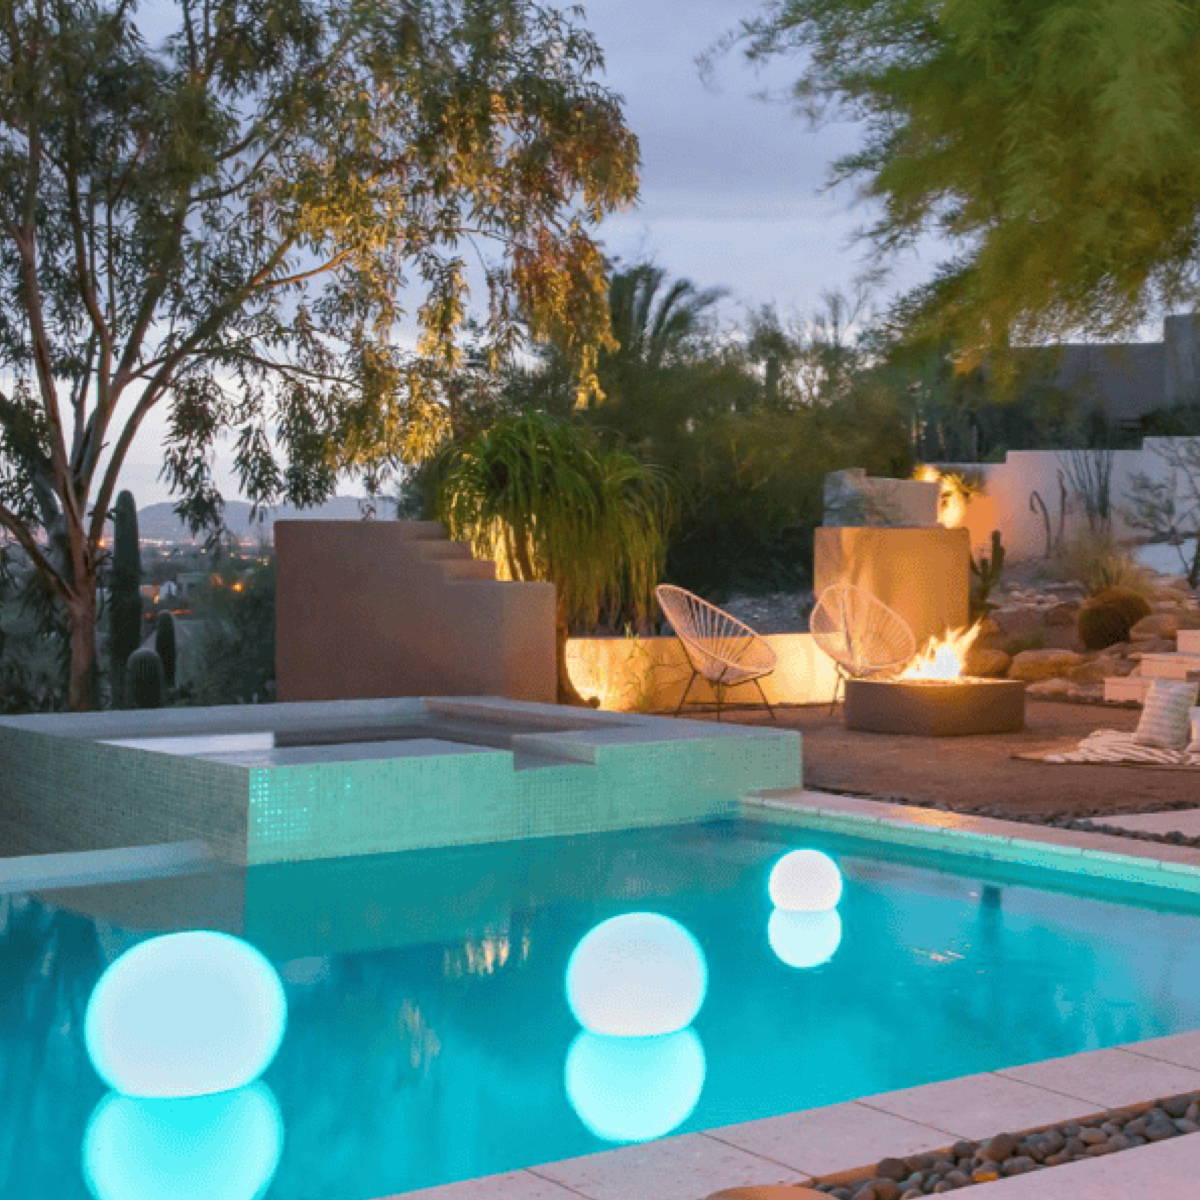 Glowing lights floating in a pool captivate while a fire burns in the background